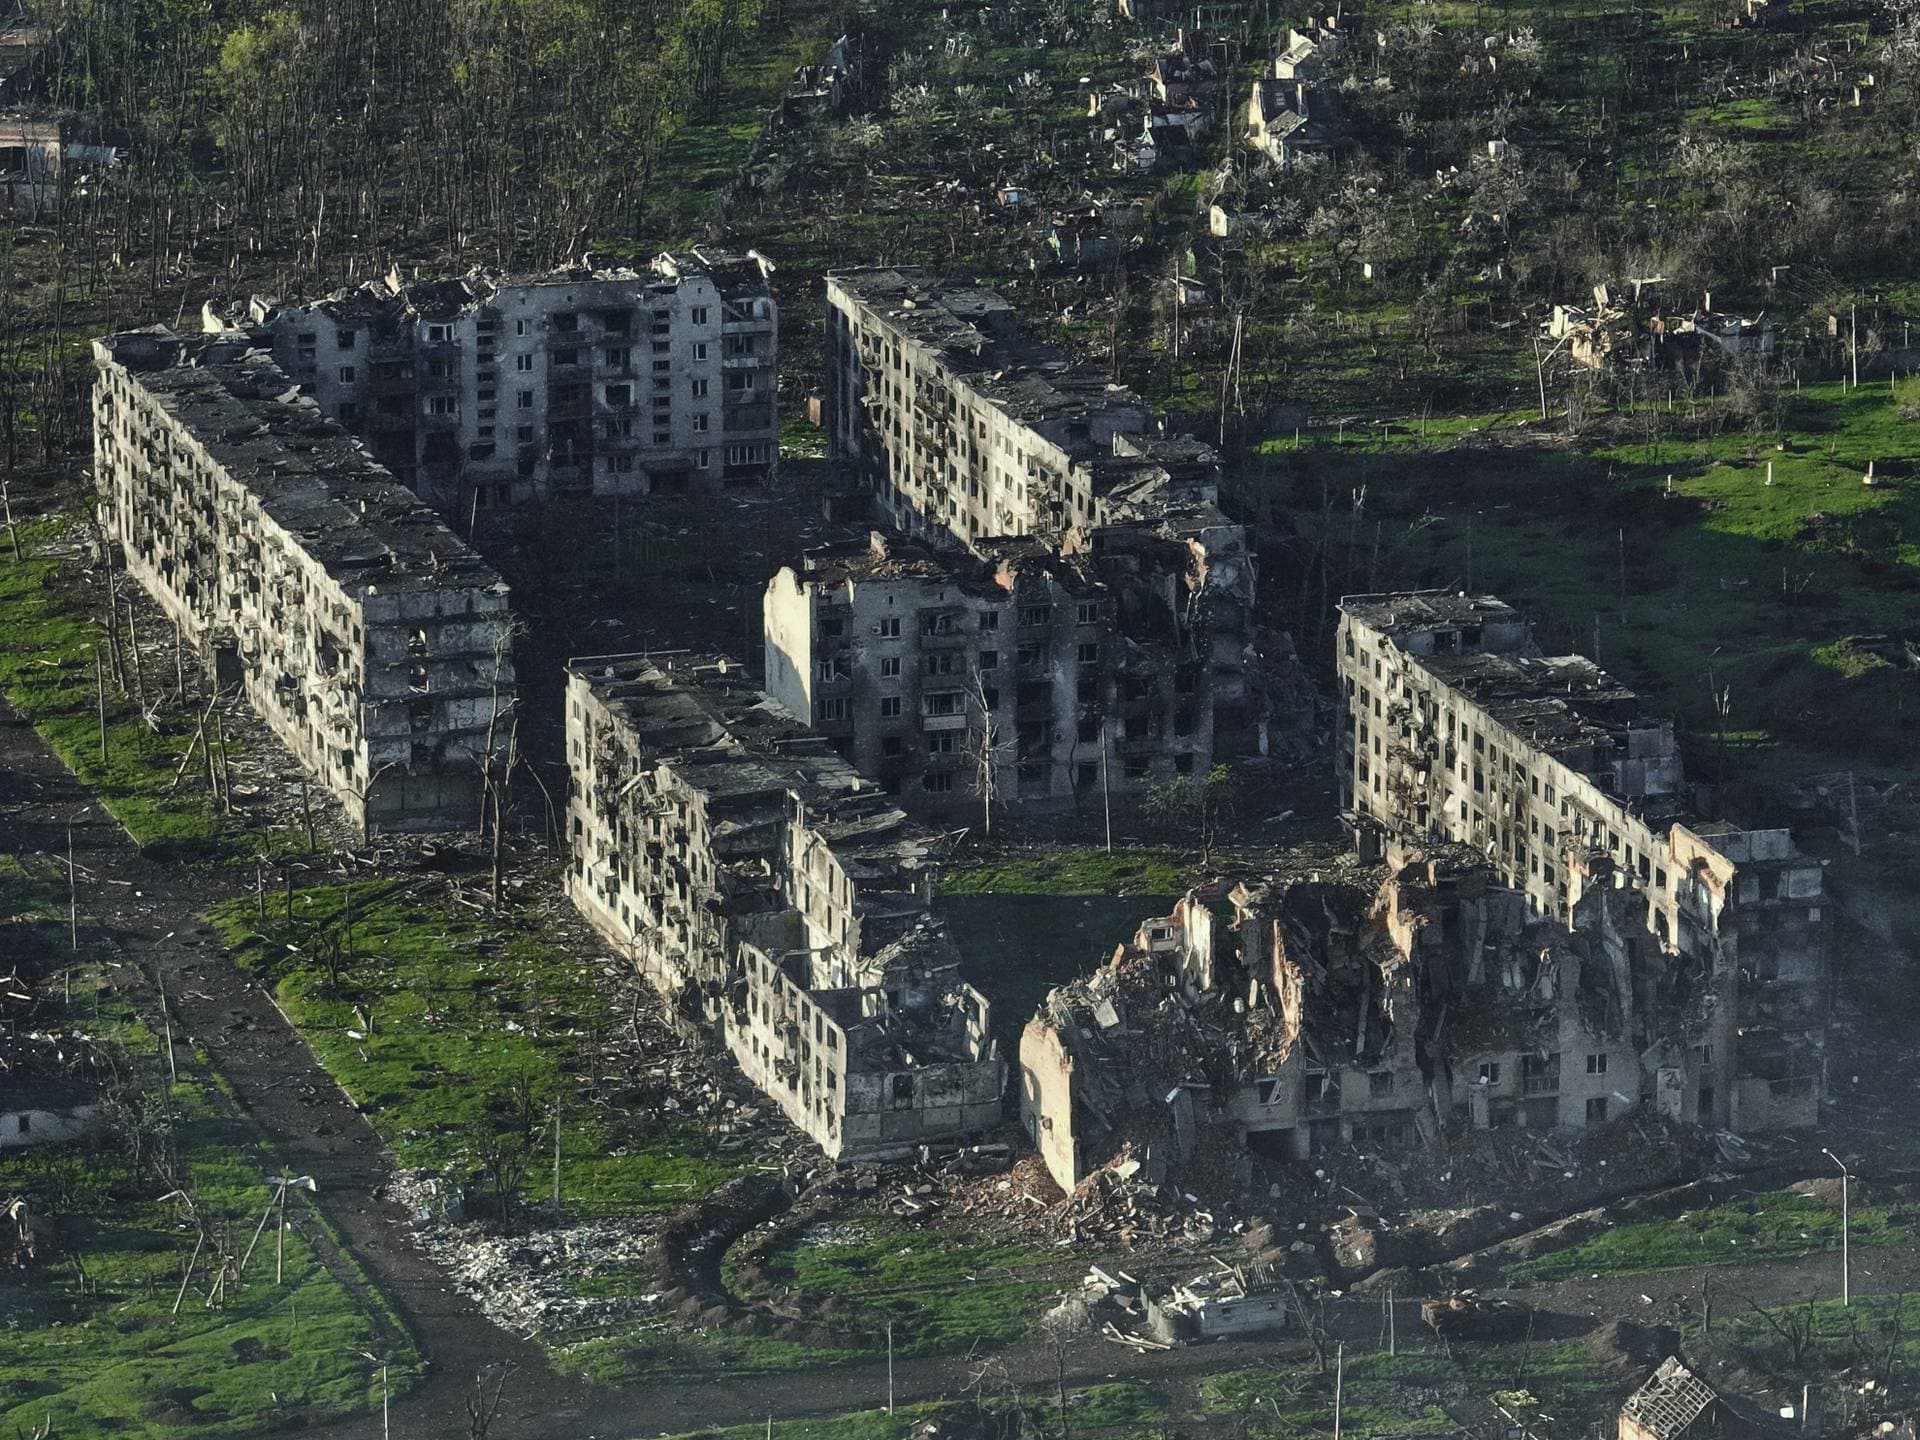 Smoke rises from buildings in this aerial view of Bakhmut